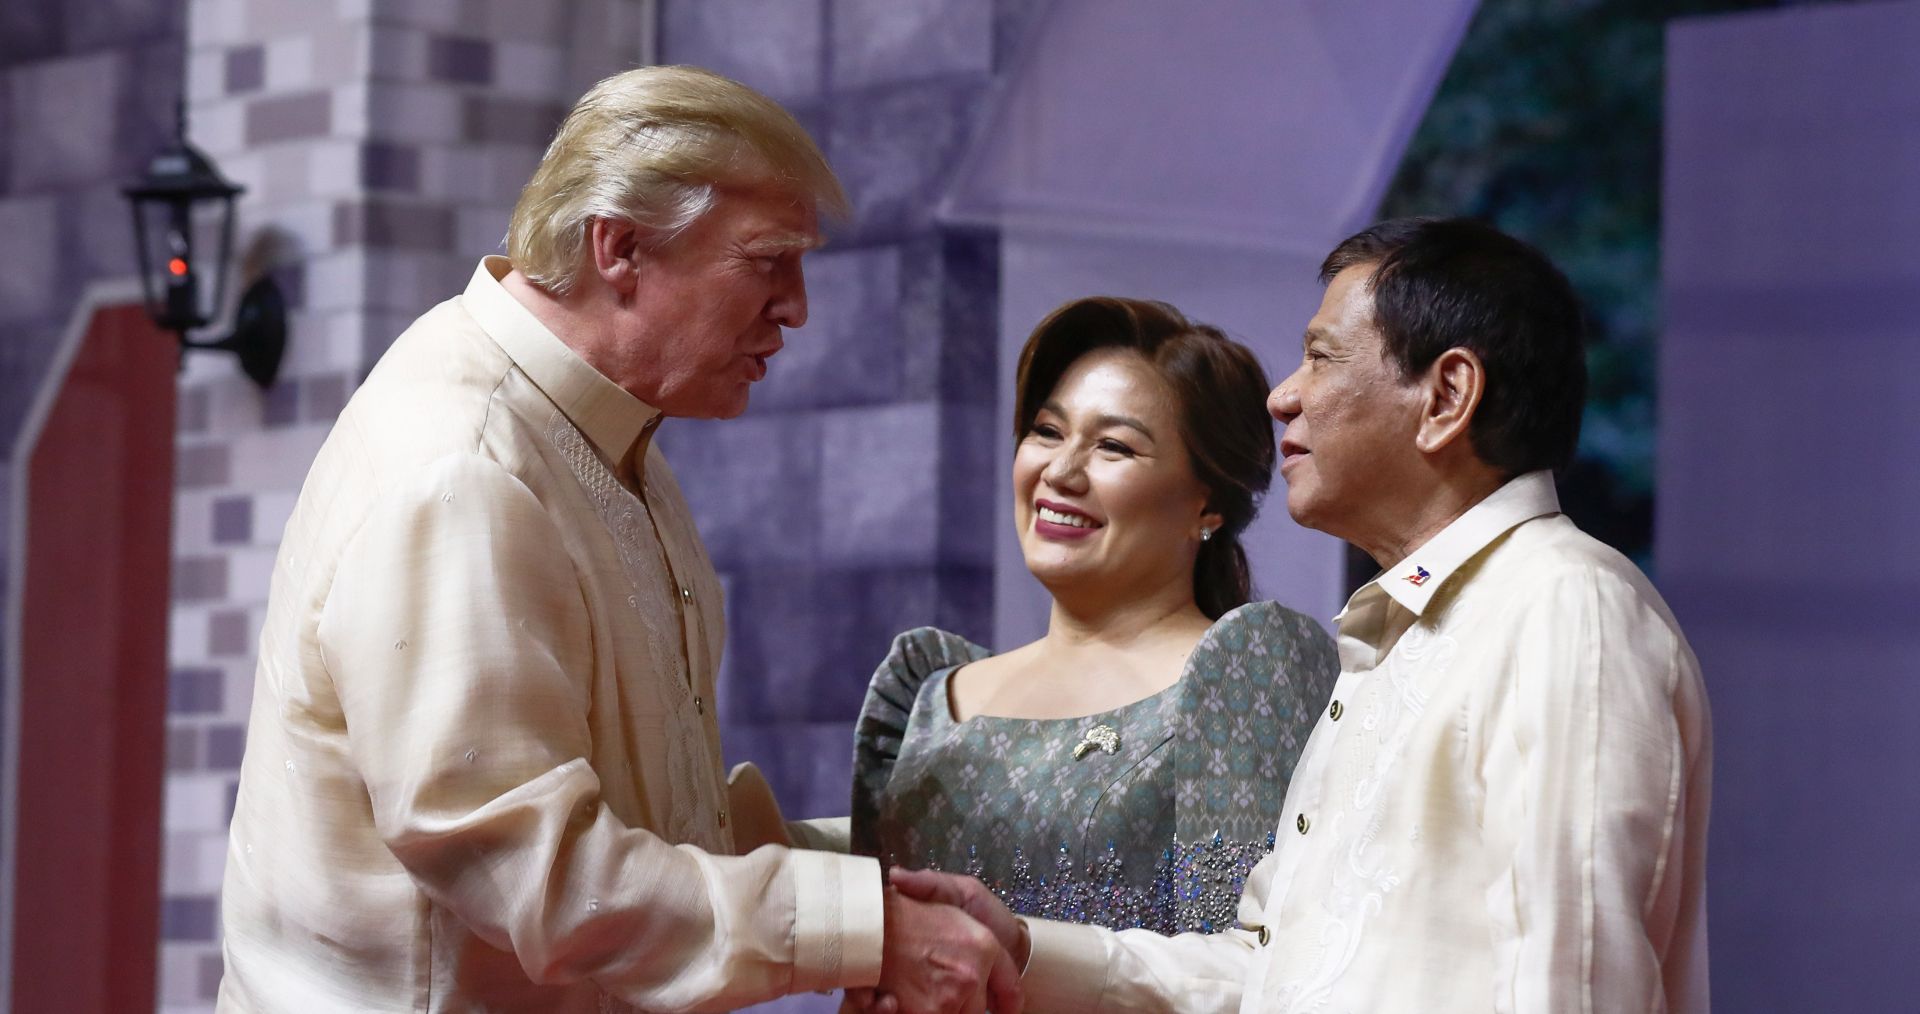 epa06325745 US President Donald J. Trump (L) is greeted by the Philippine President Rodrigo Duterte and Honeylet Avancena, his common-law wife, on arrival for the opening ceremony and gala dinner for the Association of Southeast Asian Nations (ASEAN) Summit in Manila, Philippines, 12 November 2017 (issued 13 November 2017). The Philippines is hosting the 31st ASEAN Summit and Related Meetings from 10 to 14 November.  EPA/ALEX ELLINGHAUSEN / POOL  AUSTRALIA AND NEW ZEALAND OUT